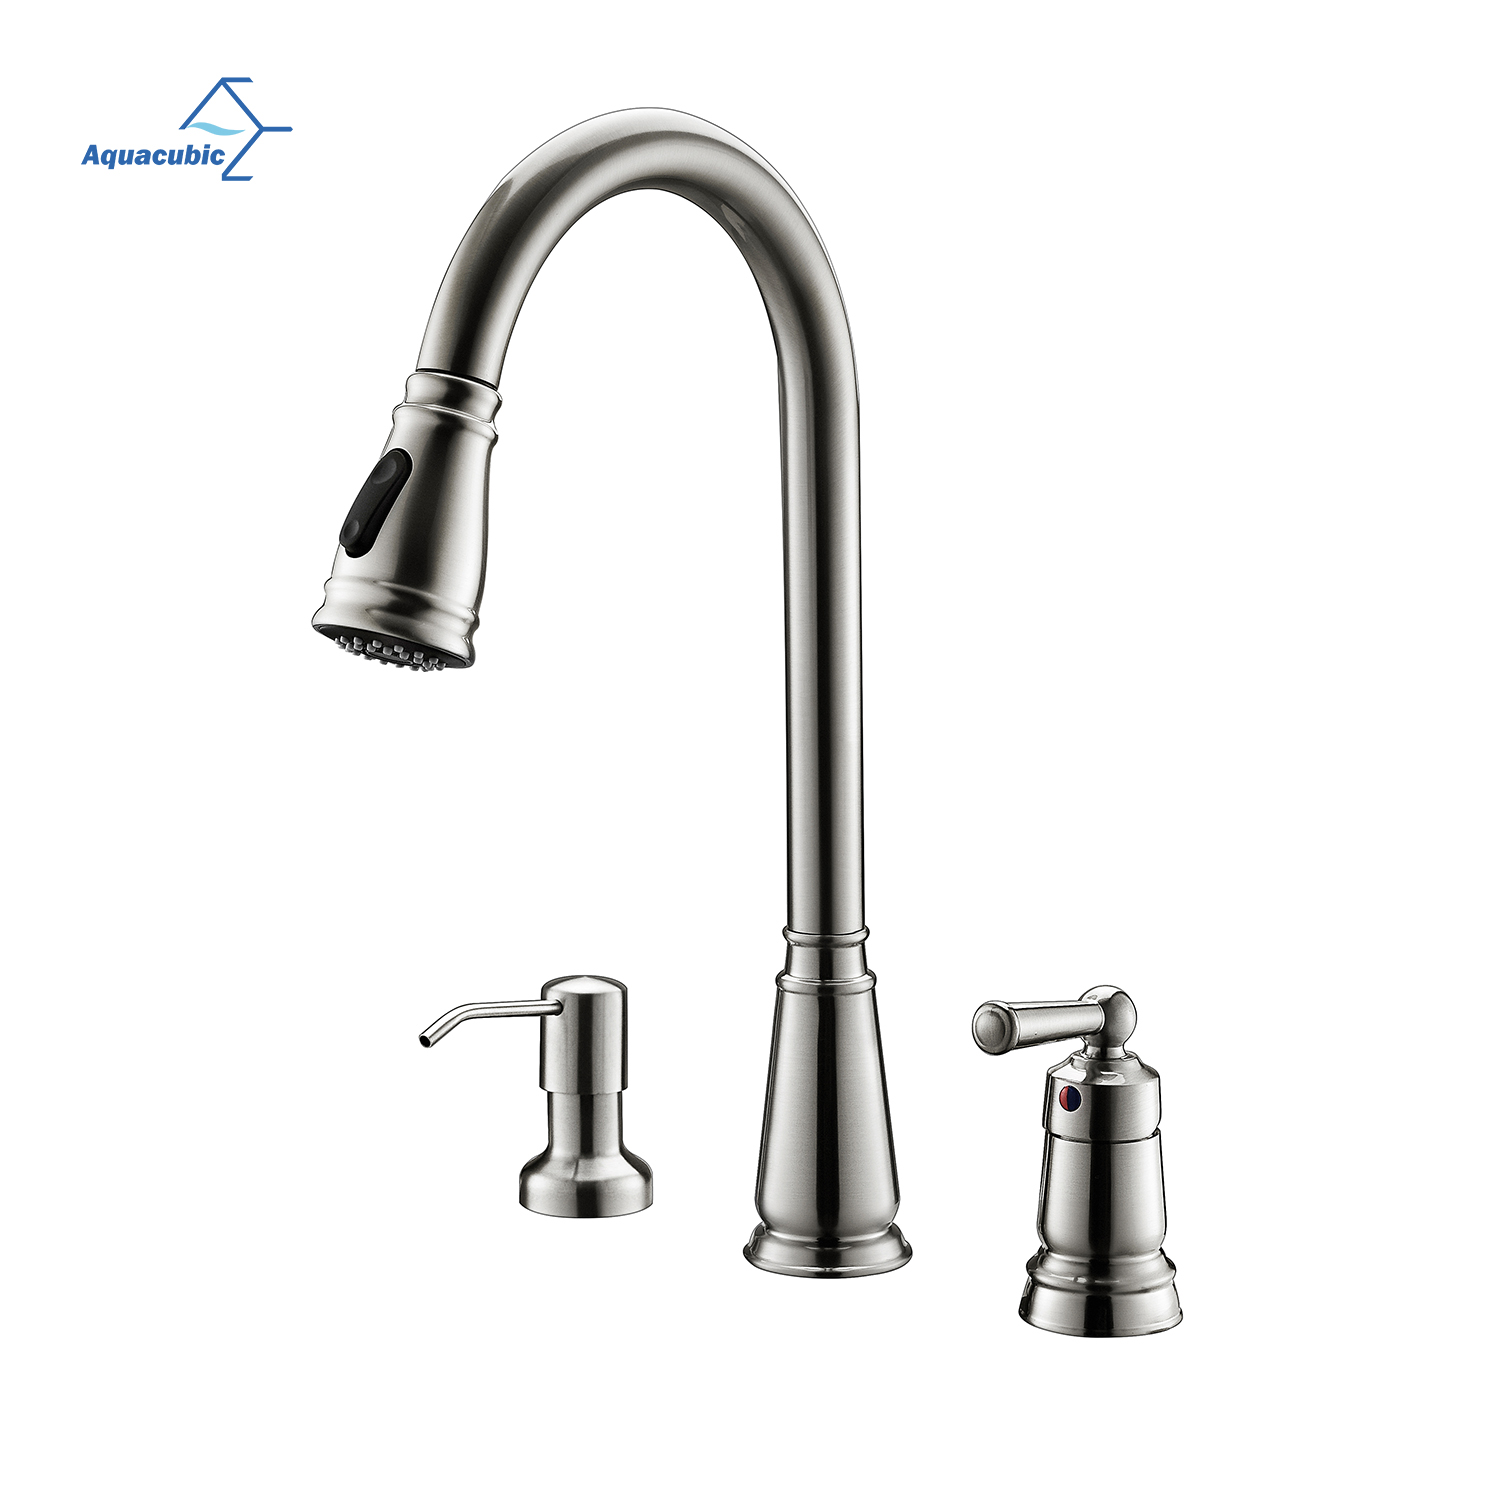 Aquacubic cUPC Water Saving Excellent Washbasin Pull Out Kitchen Faucet